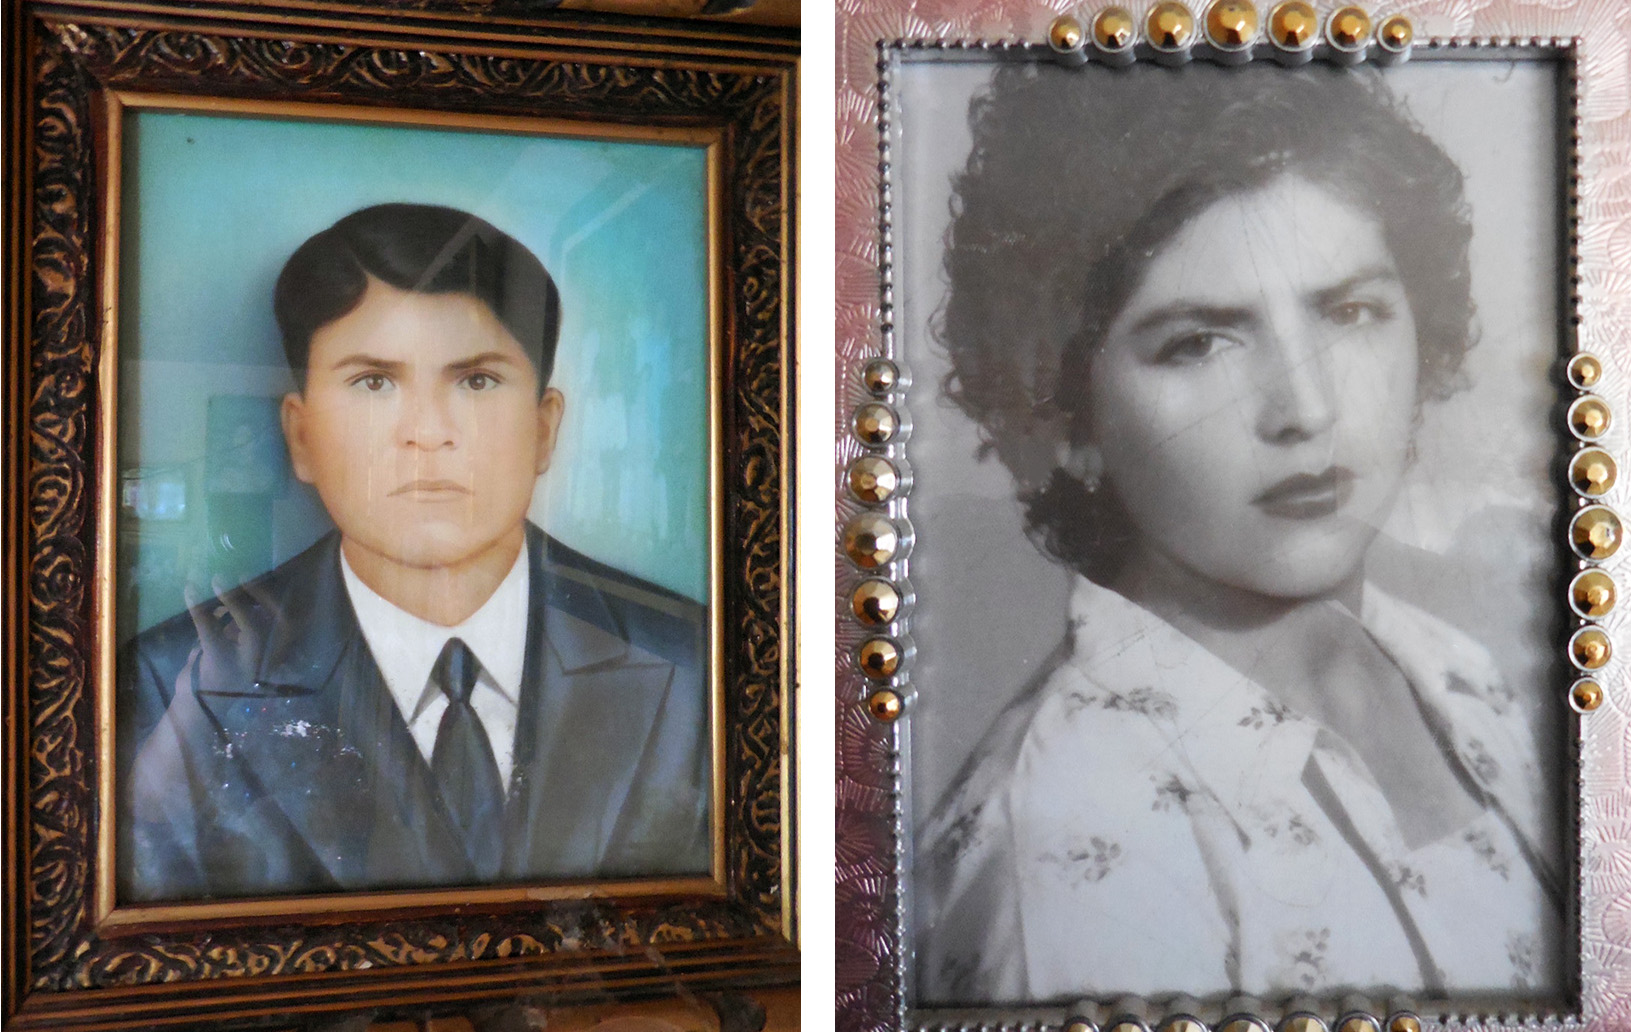 Two framed portraits, next to each other, of a man and a woman.